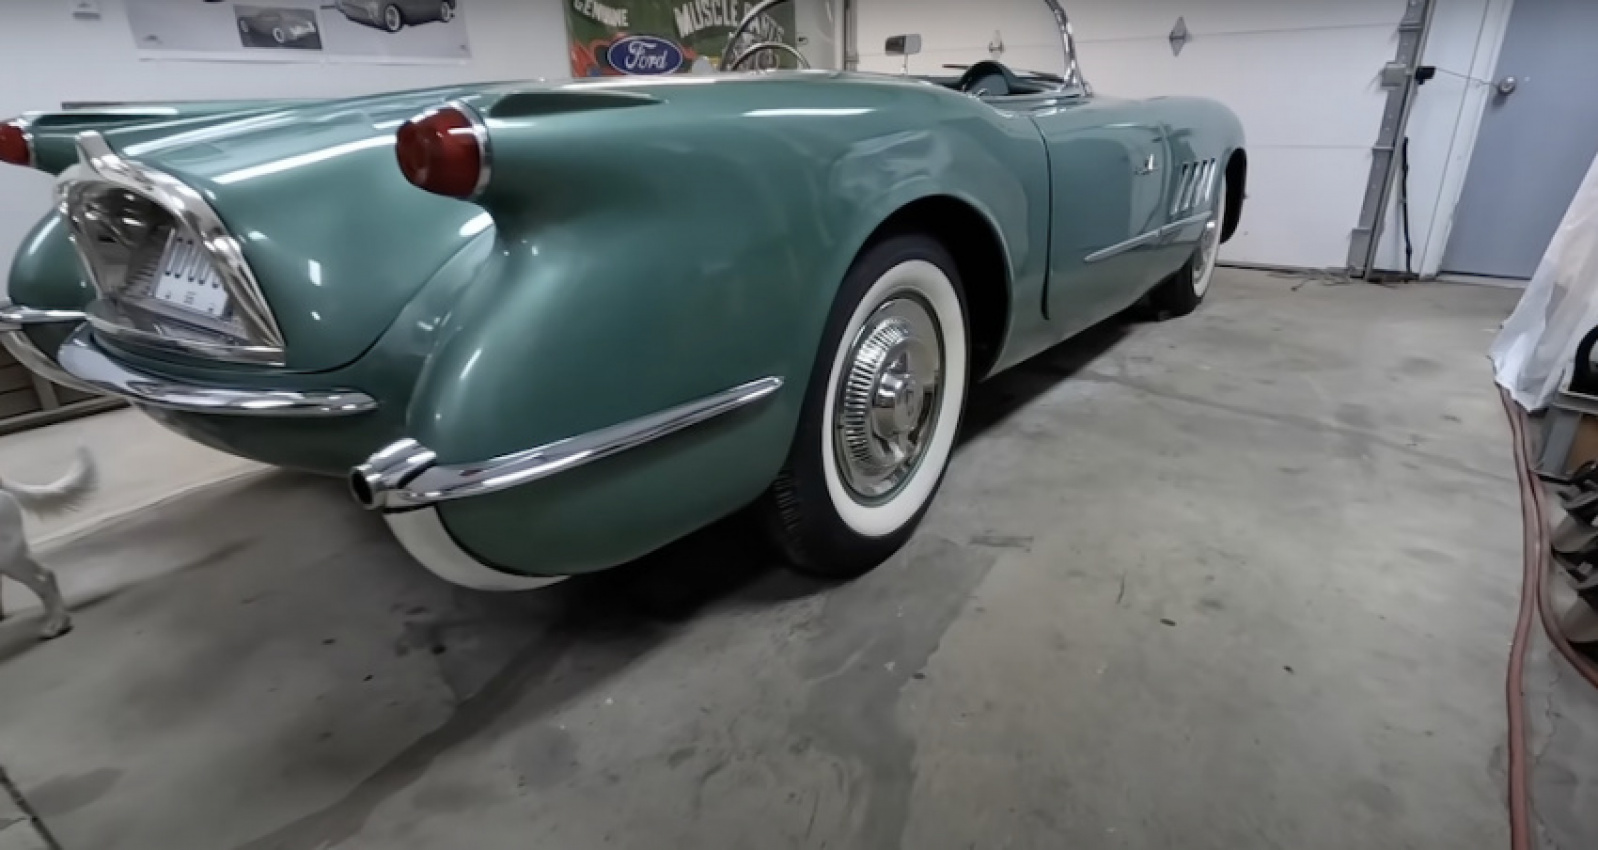 autos, cars, chevrolet, chevrolet corvette, corvette, corvette, incredibly cool c1 corvette styling prototype discovered after decades in storage